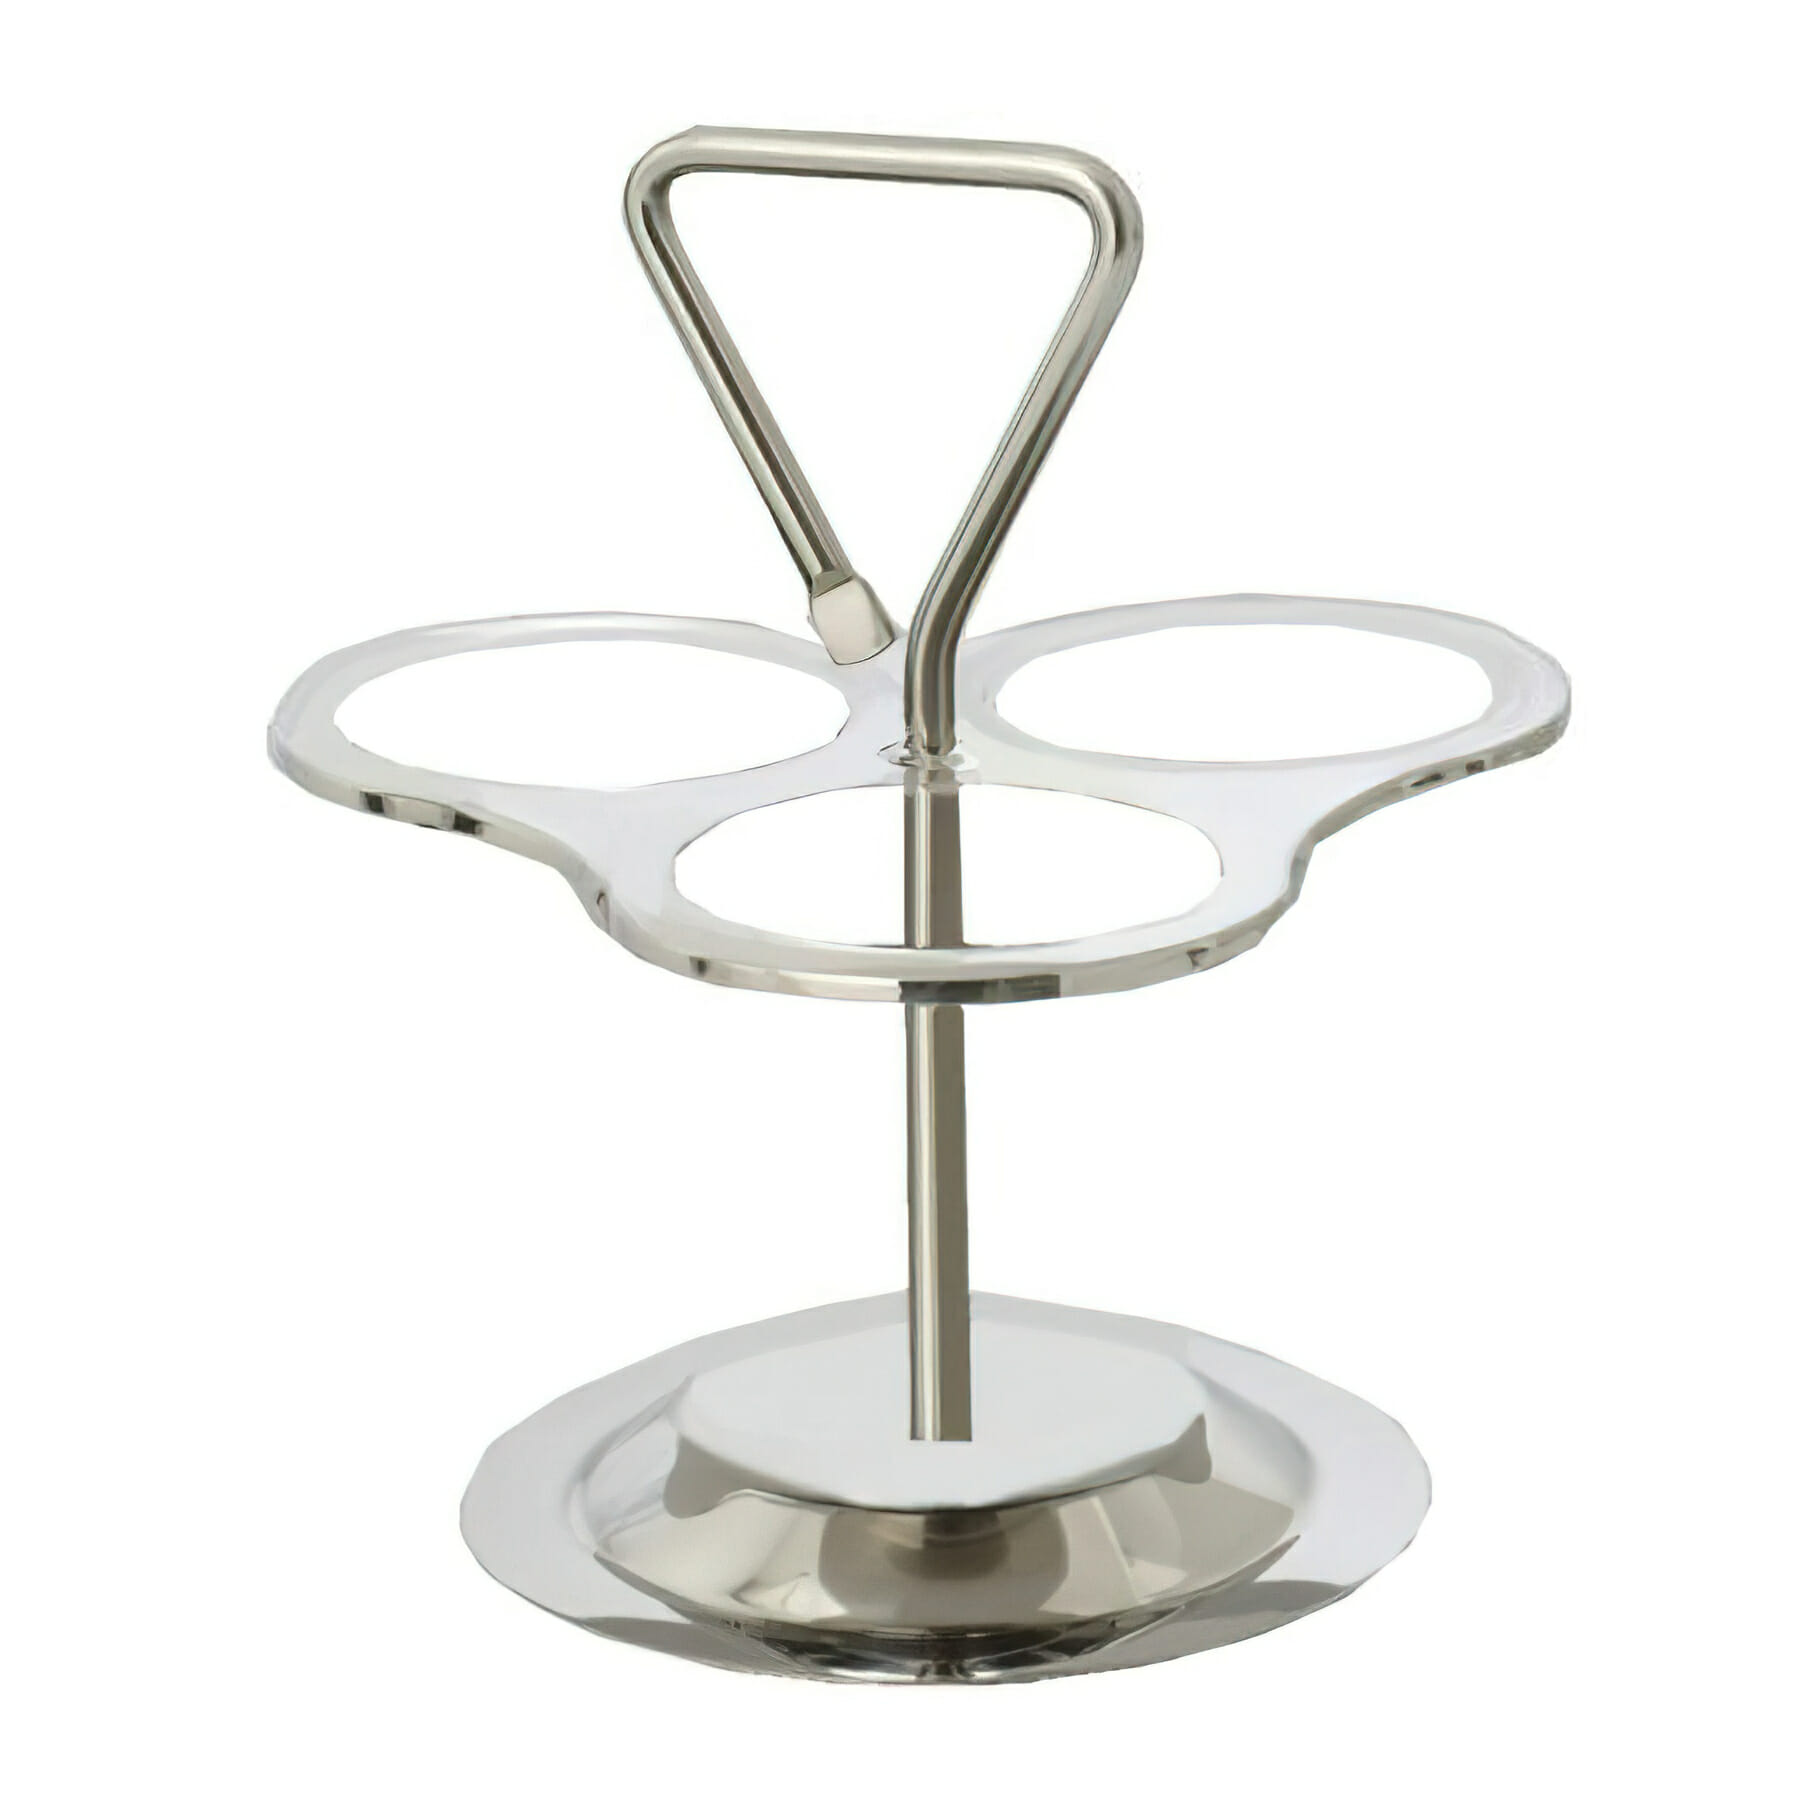 10" Stainless Steel Lazy Susan w/ 3 rings, 10" tall (fits SSLSB-01)  bowls sold seperatly